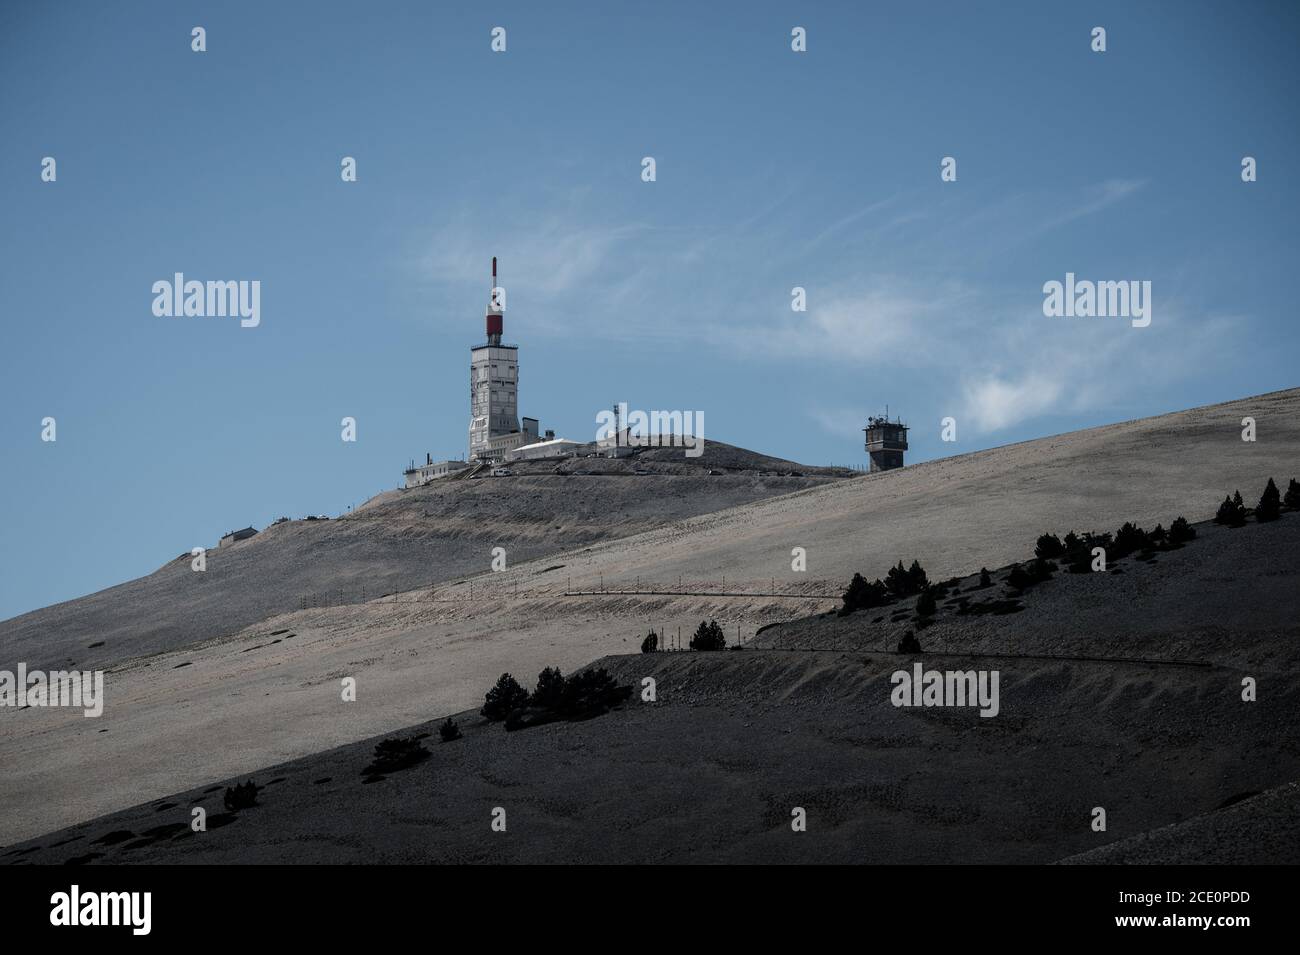 June, 2016. Mont Ventoux in the Provence region of southern France. It has gained fame through its inclusion in the Tour de France cycling race. Stock Photo